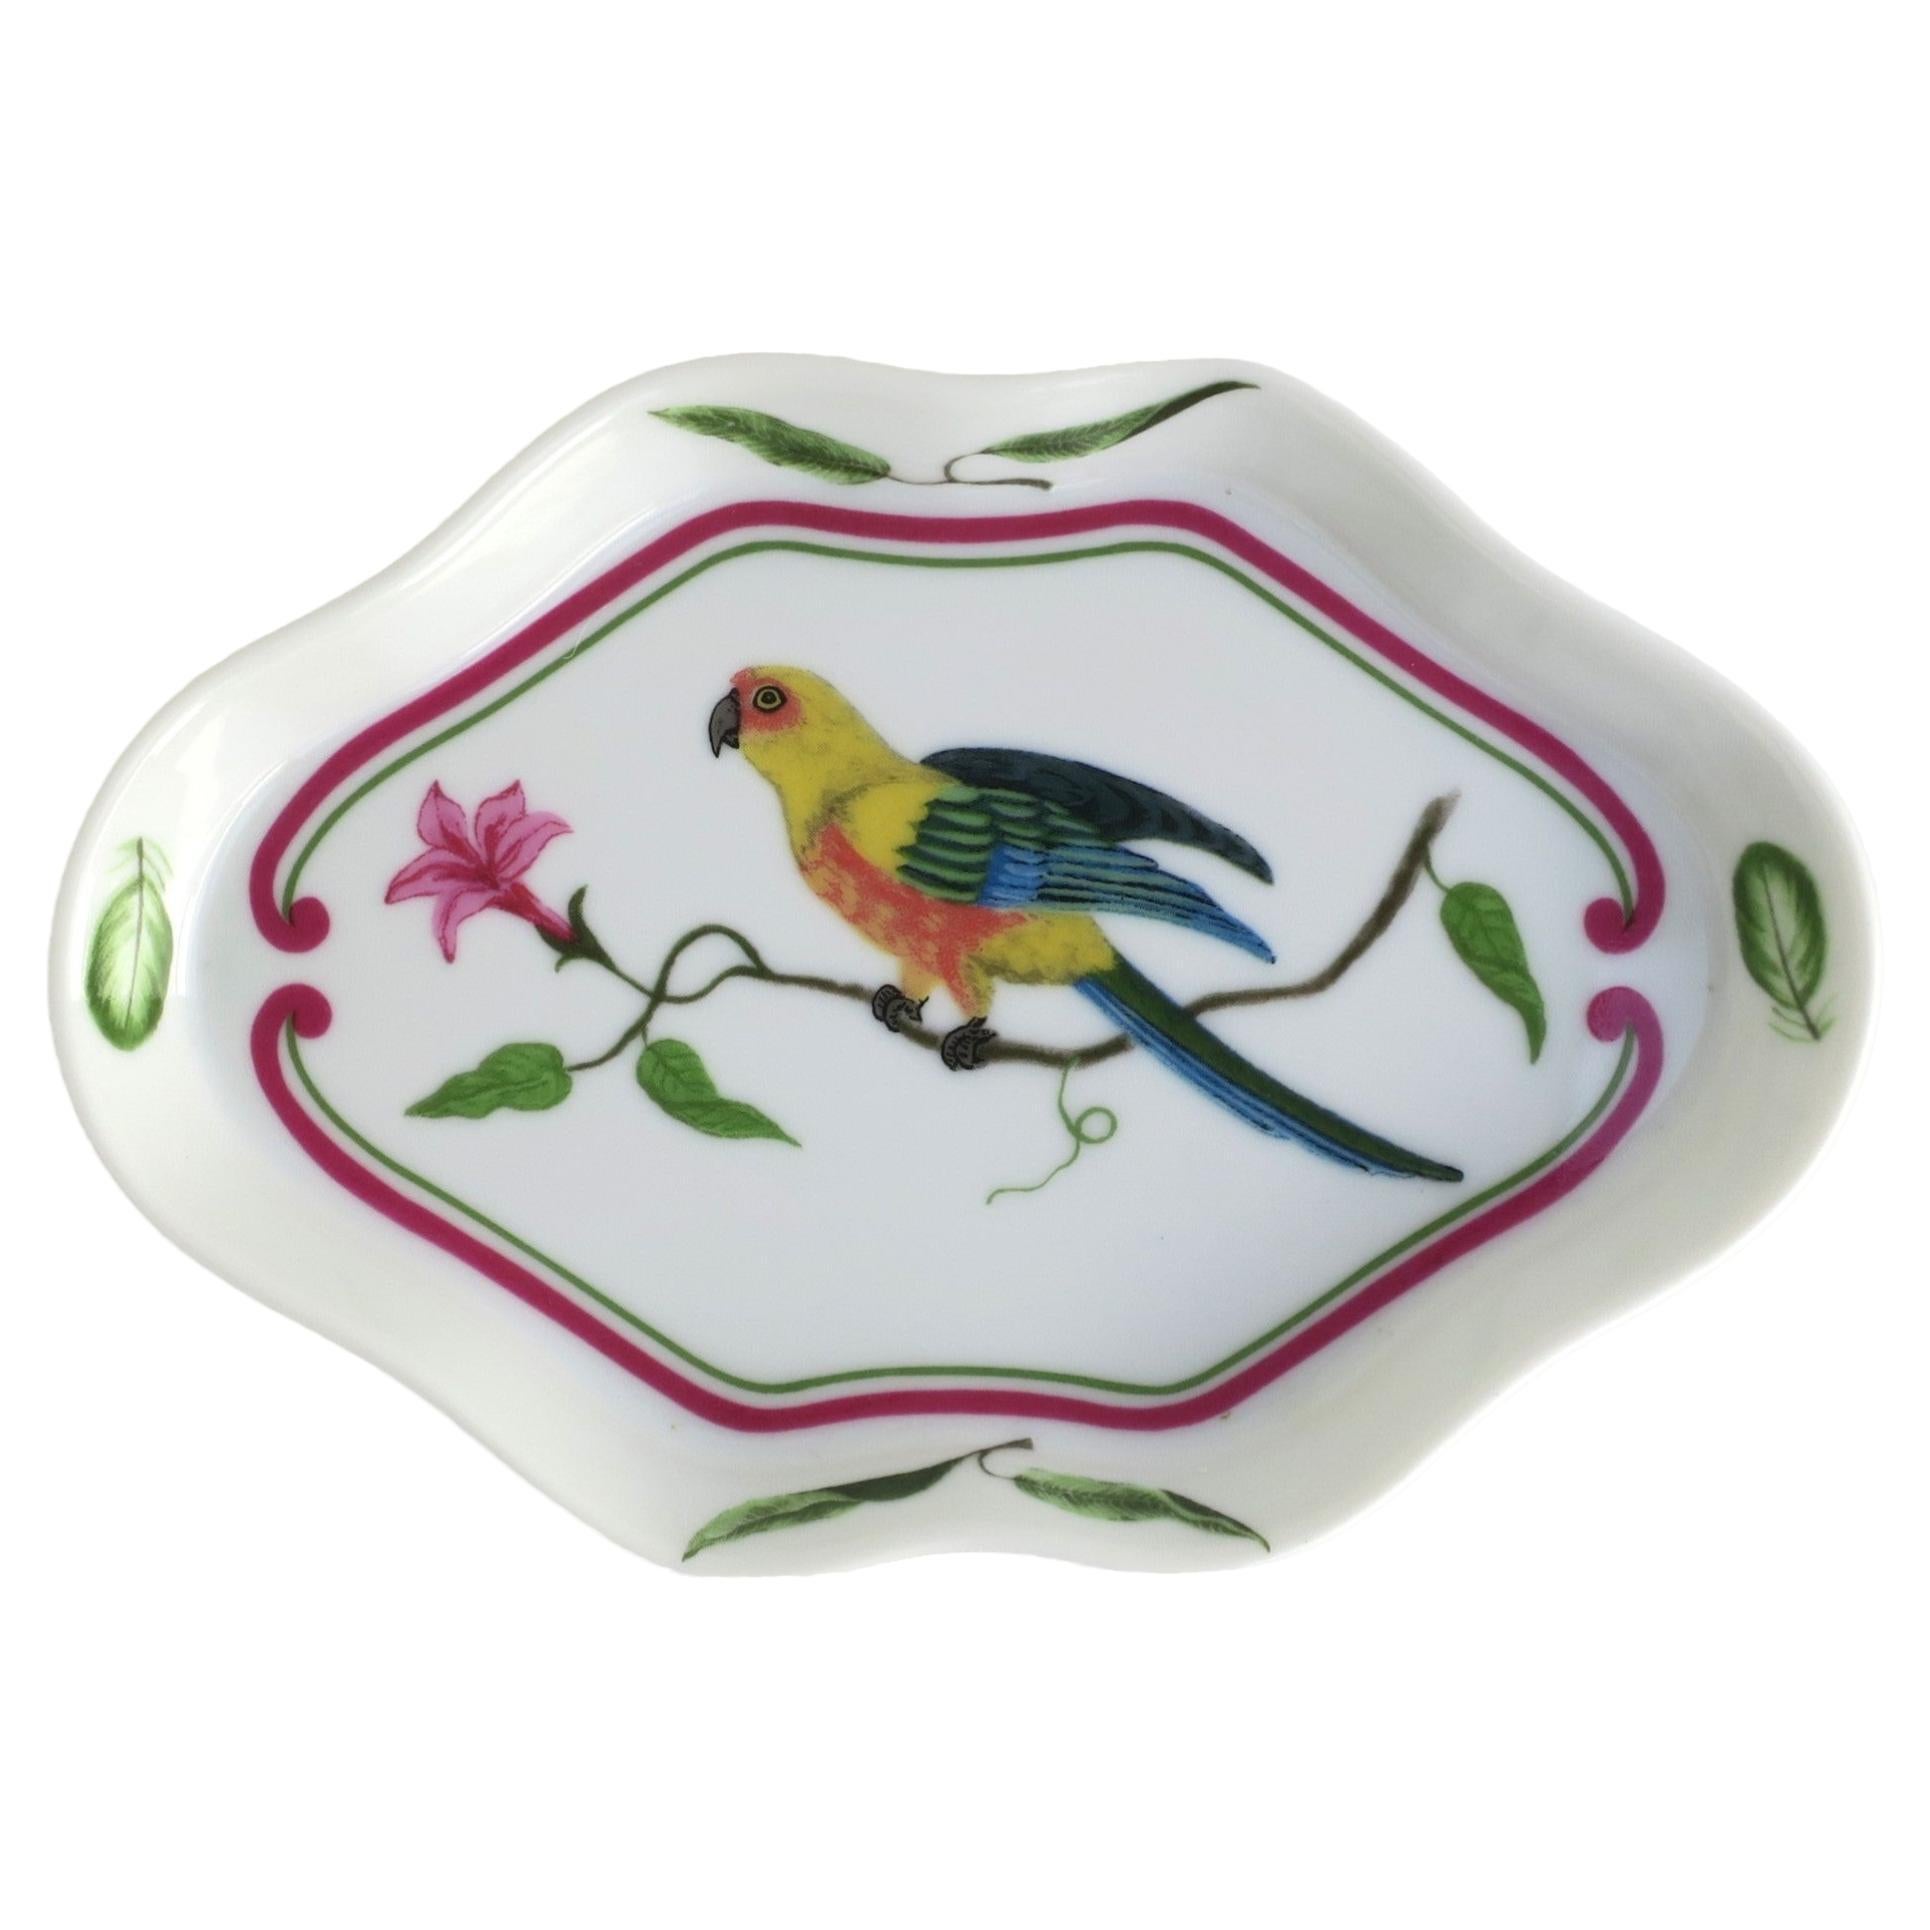 Porcelain Jewelry Dish with Parrot Bird Design, circa 1980s For Sale